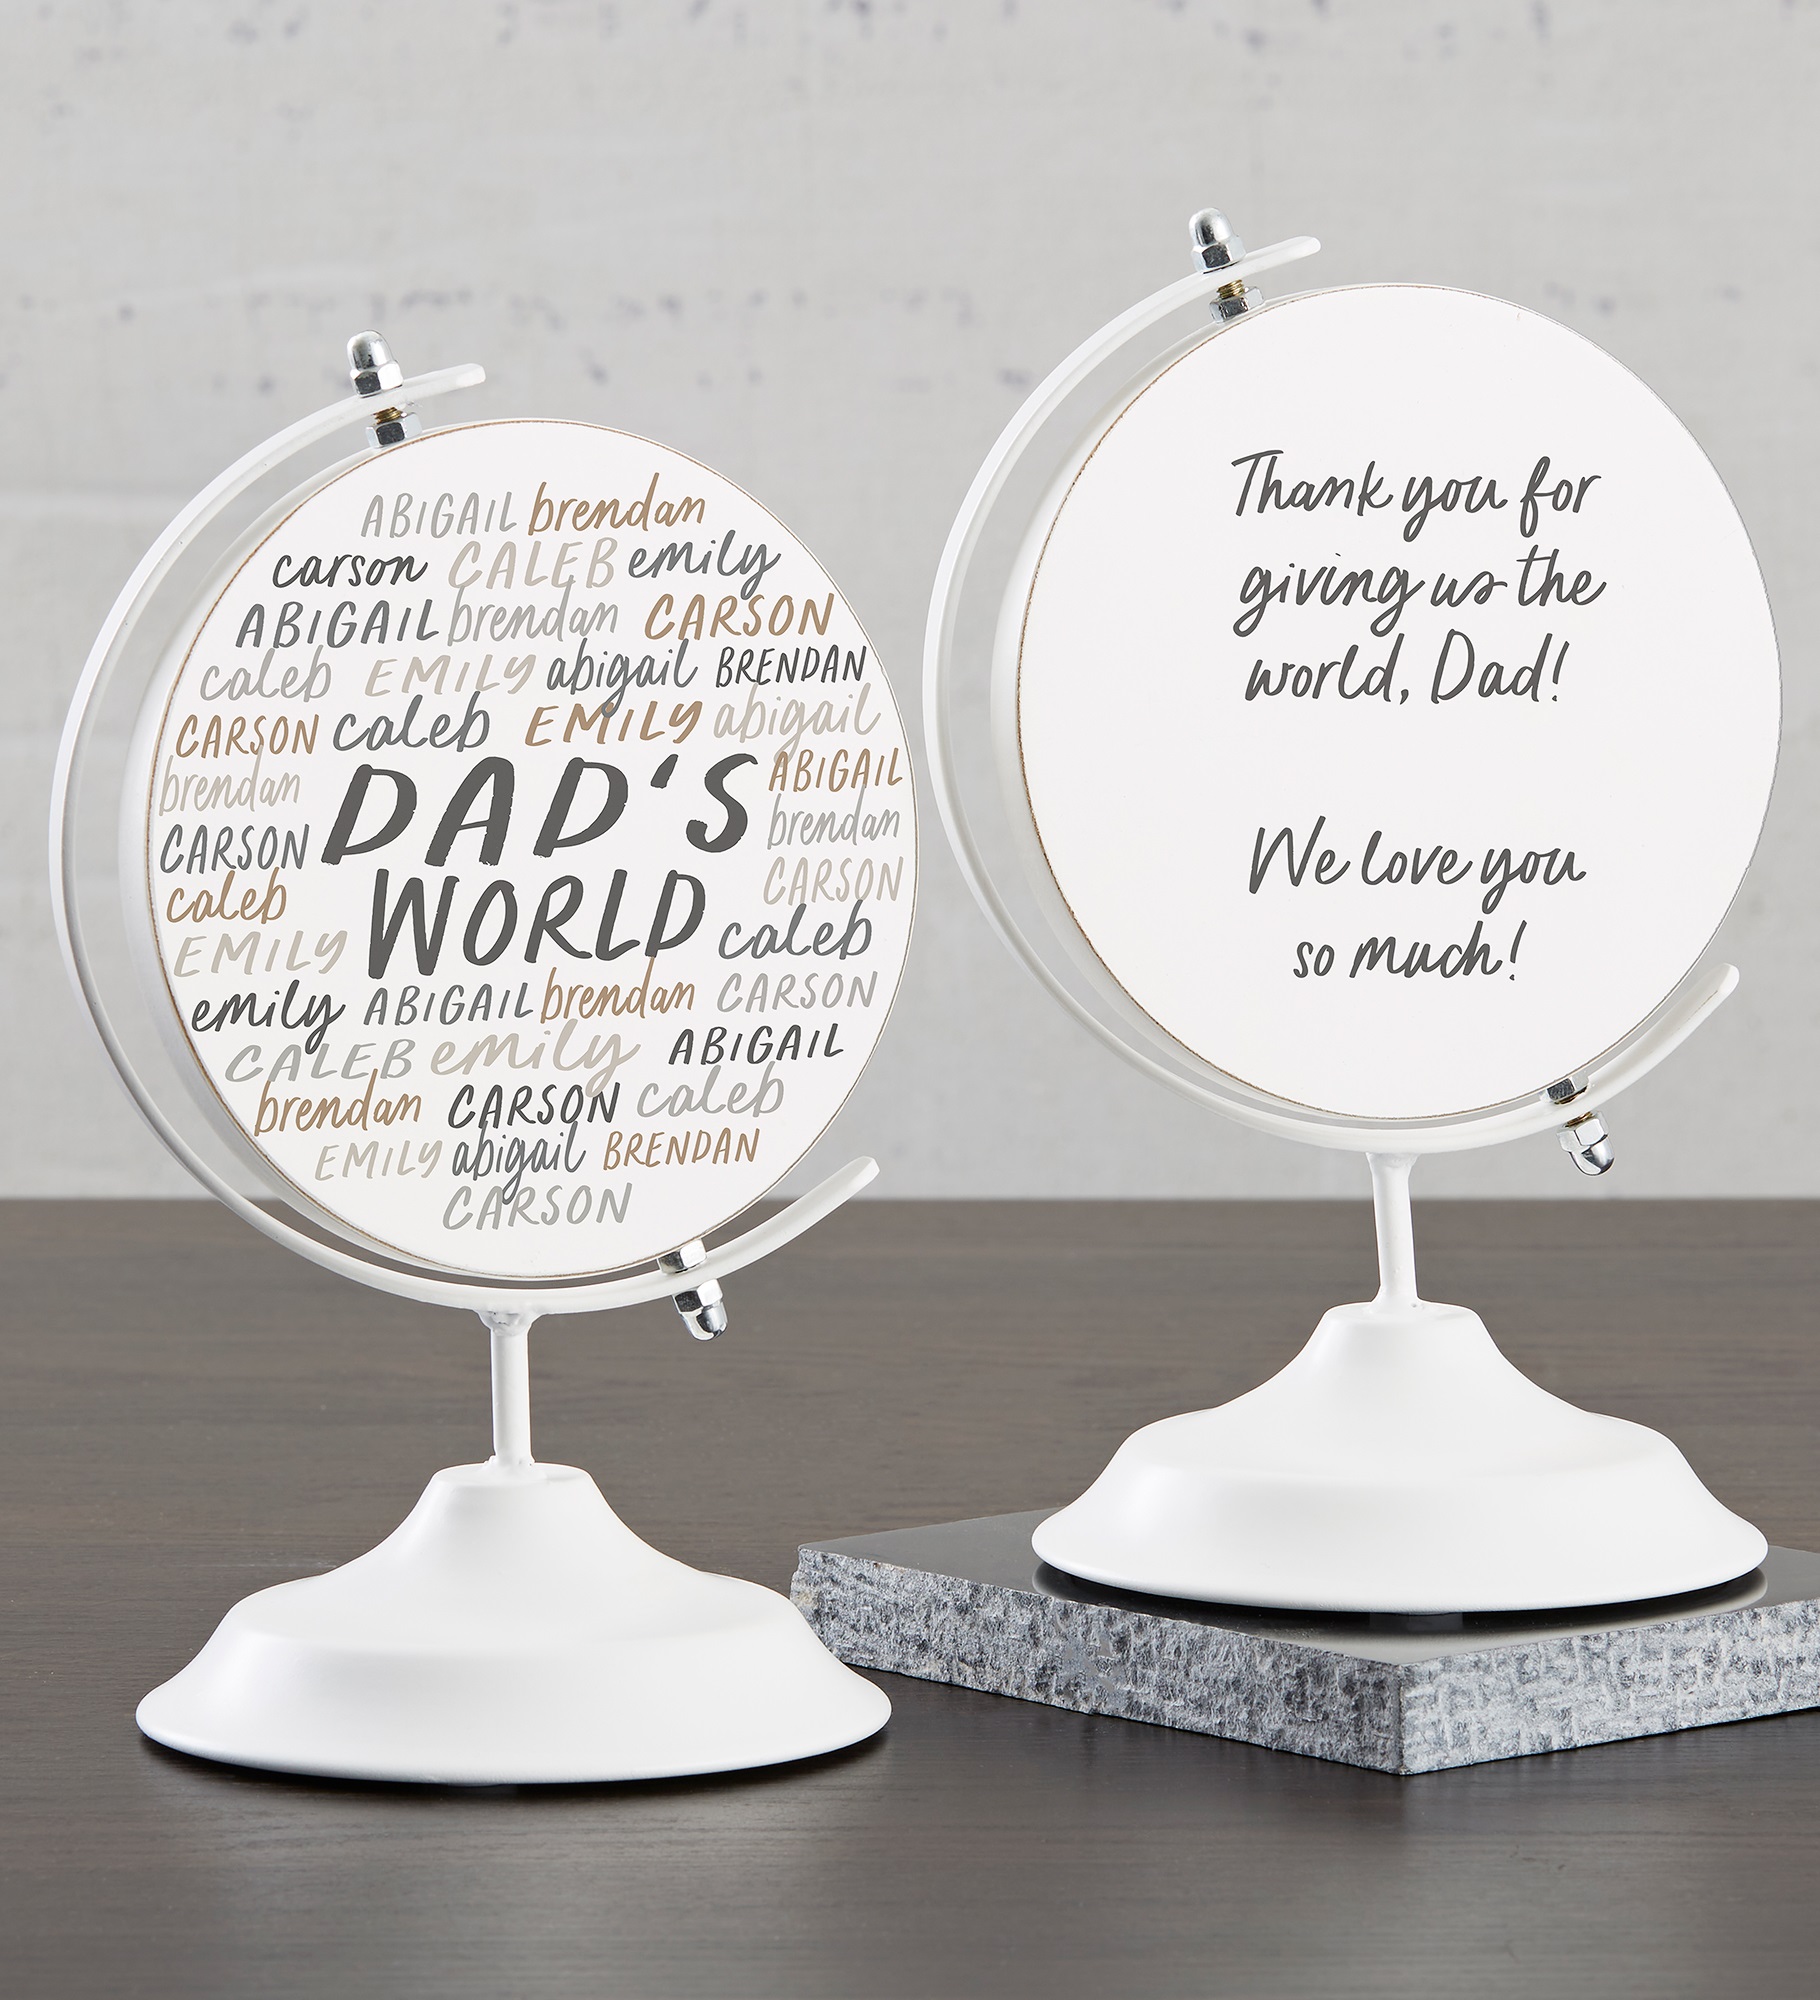 His World Personalized Wooden Decorative Globe for Dad